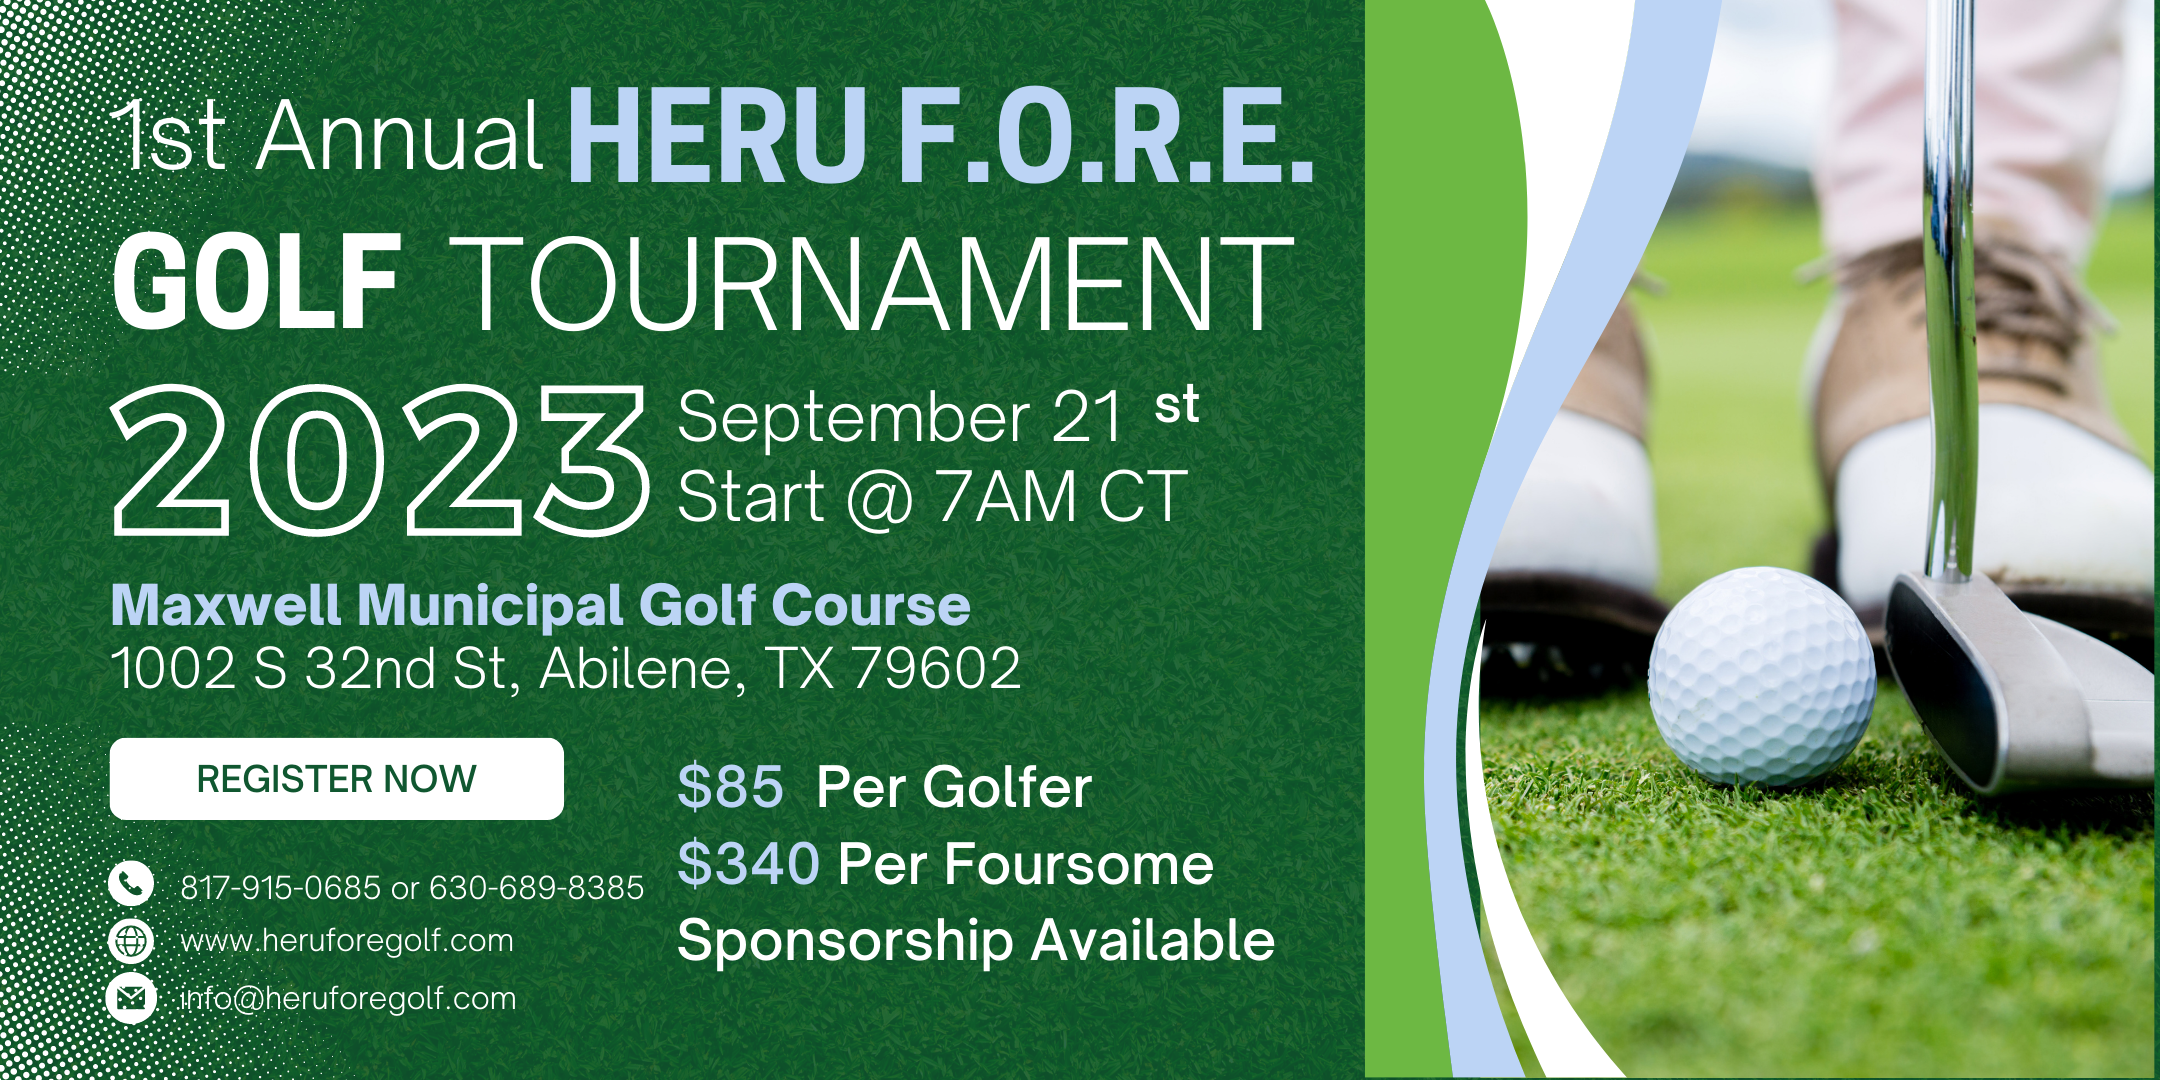 HERU 1st Ann. Fundamentals Of Recovering Excellence (F.O.R.E.) Golf Outing